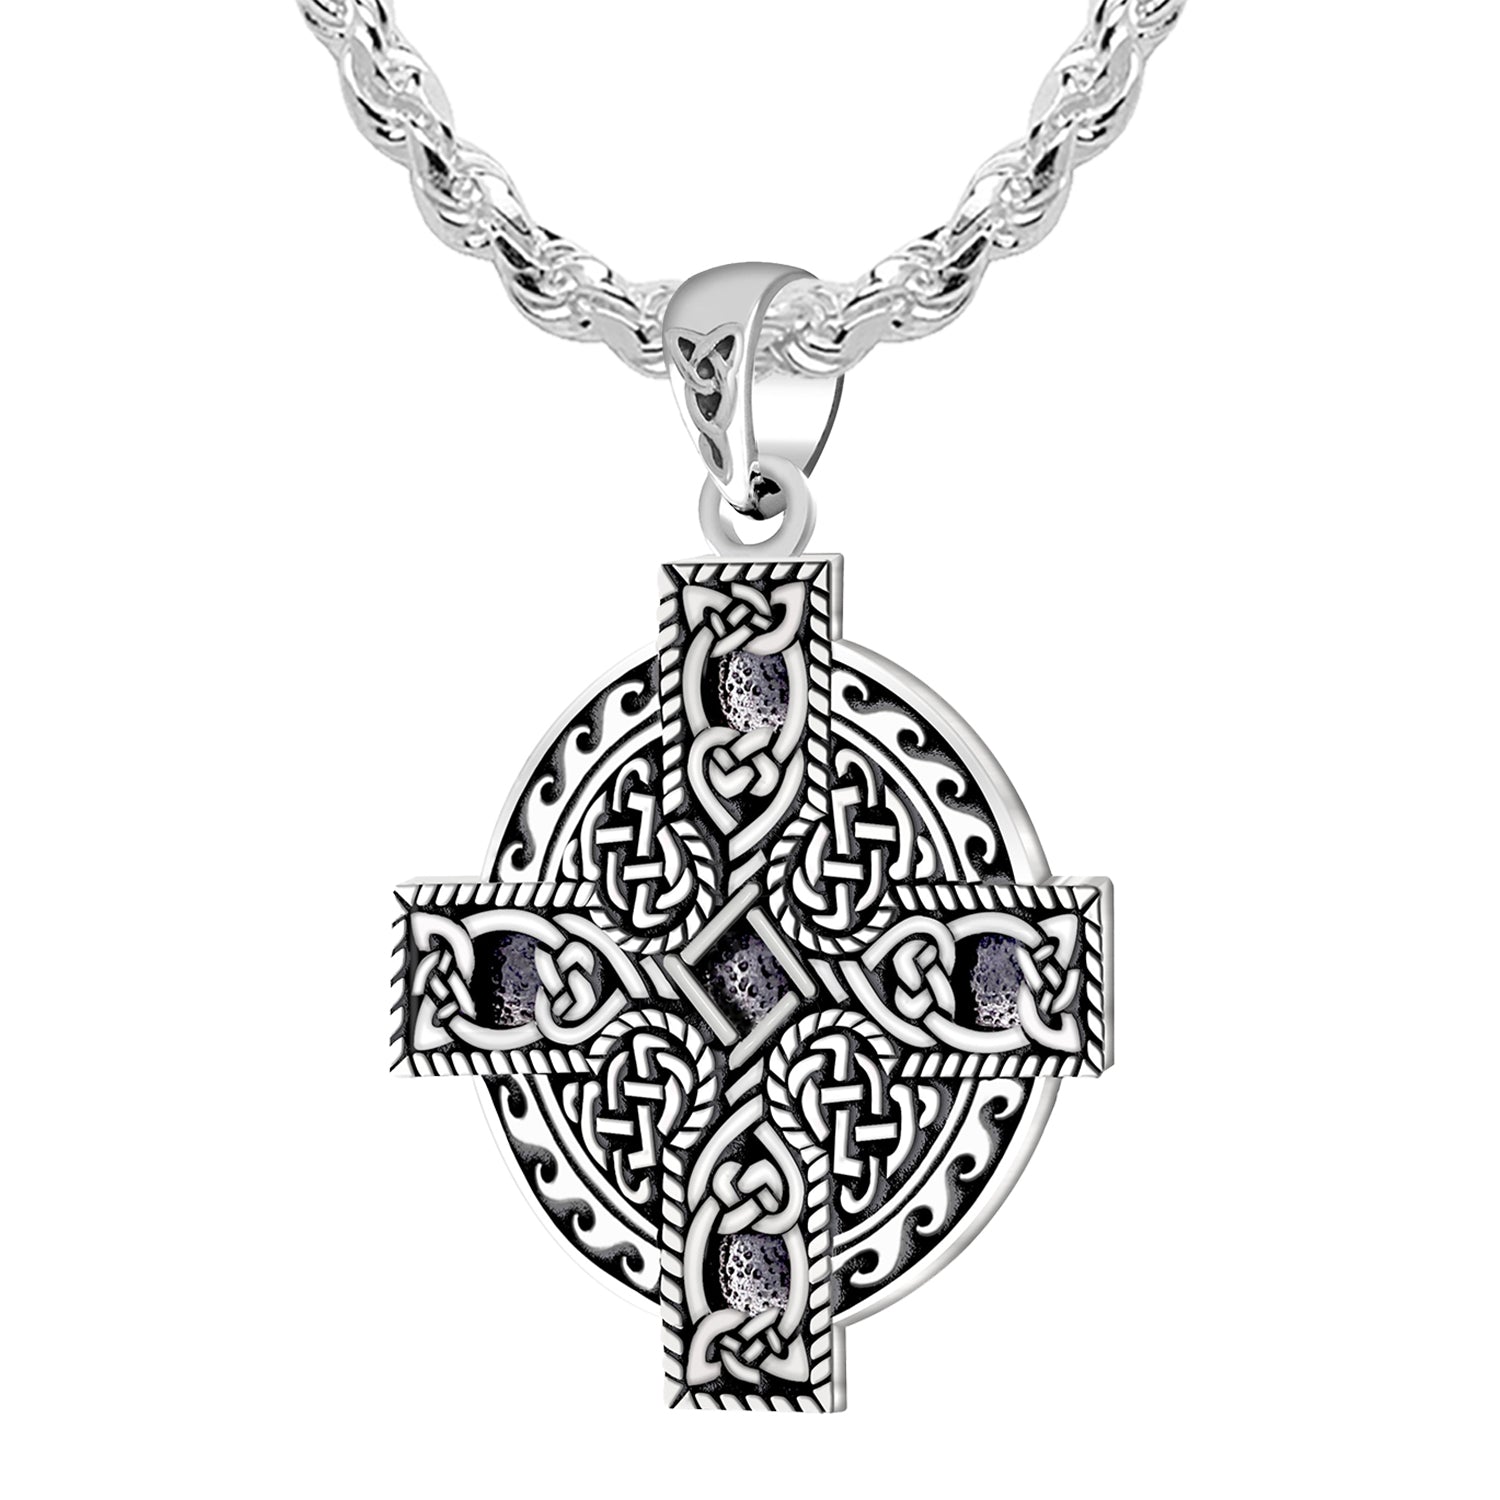 925 Sterling Silver Celtic Spiral Knotwork Cross Pendant Charm Necklace - US Jewels